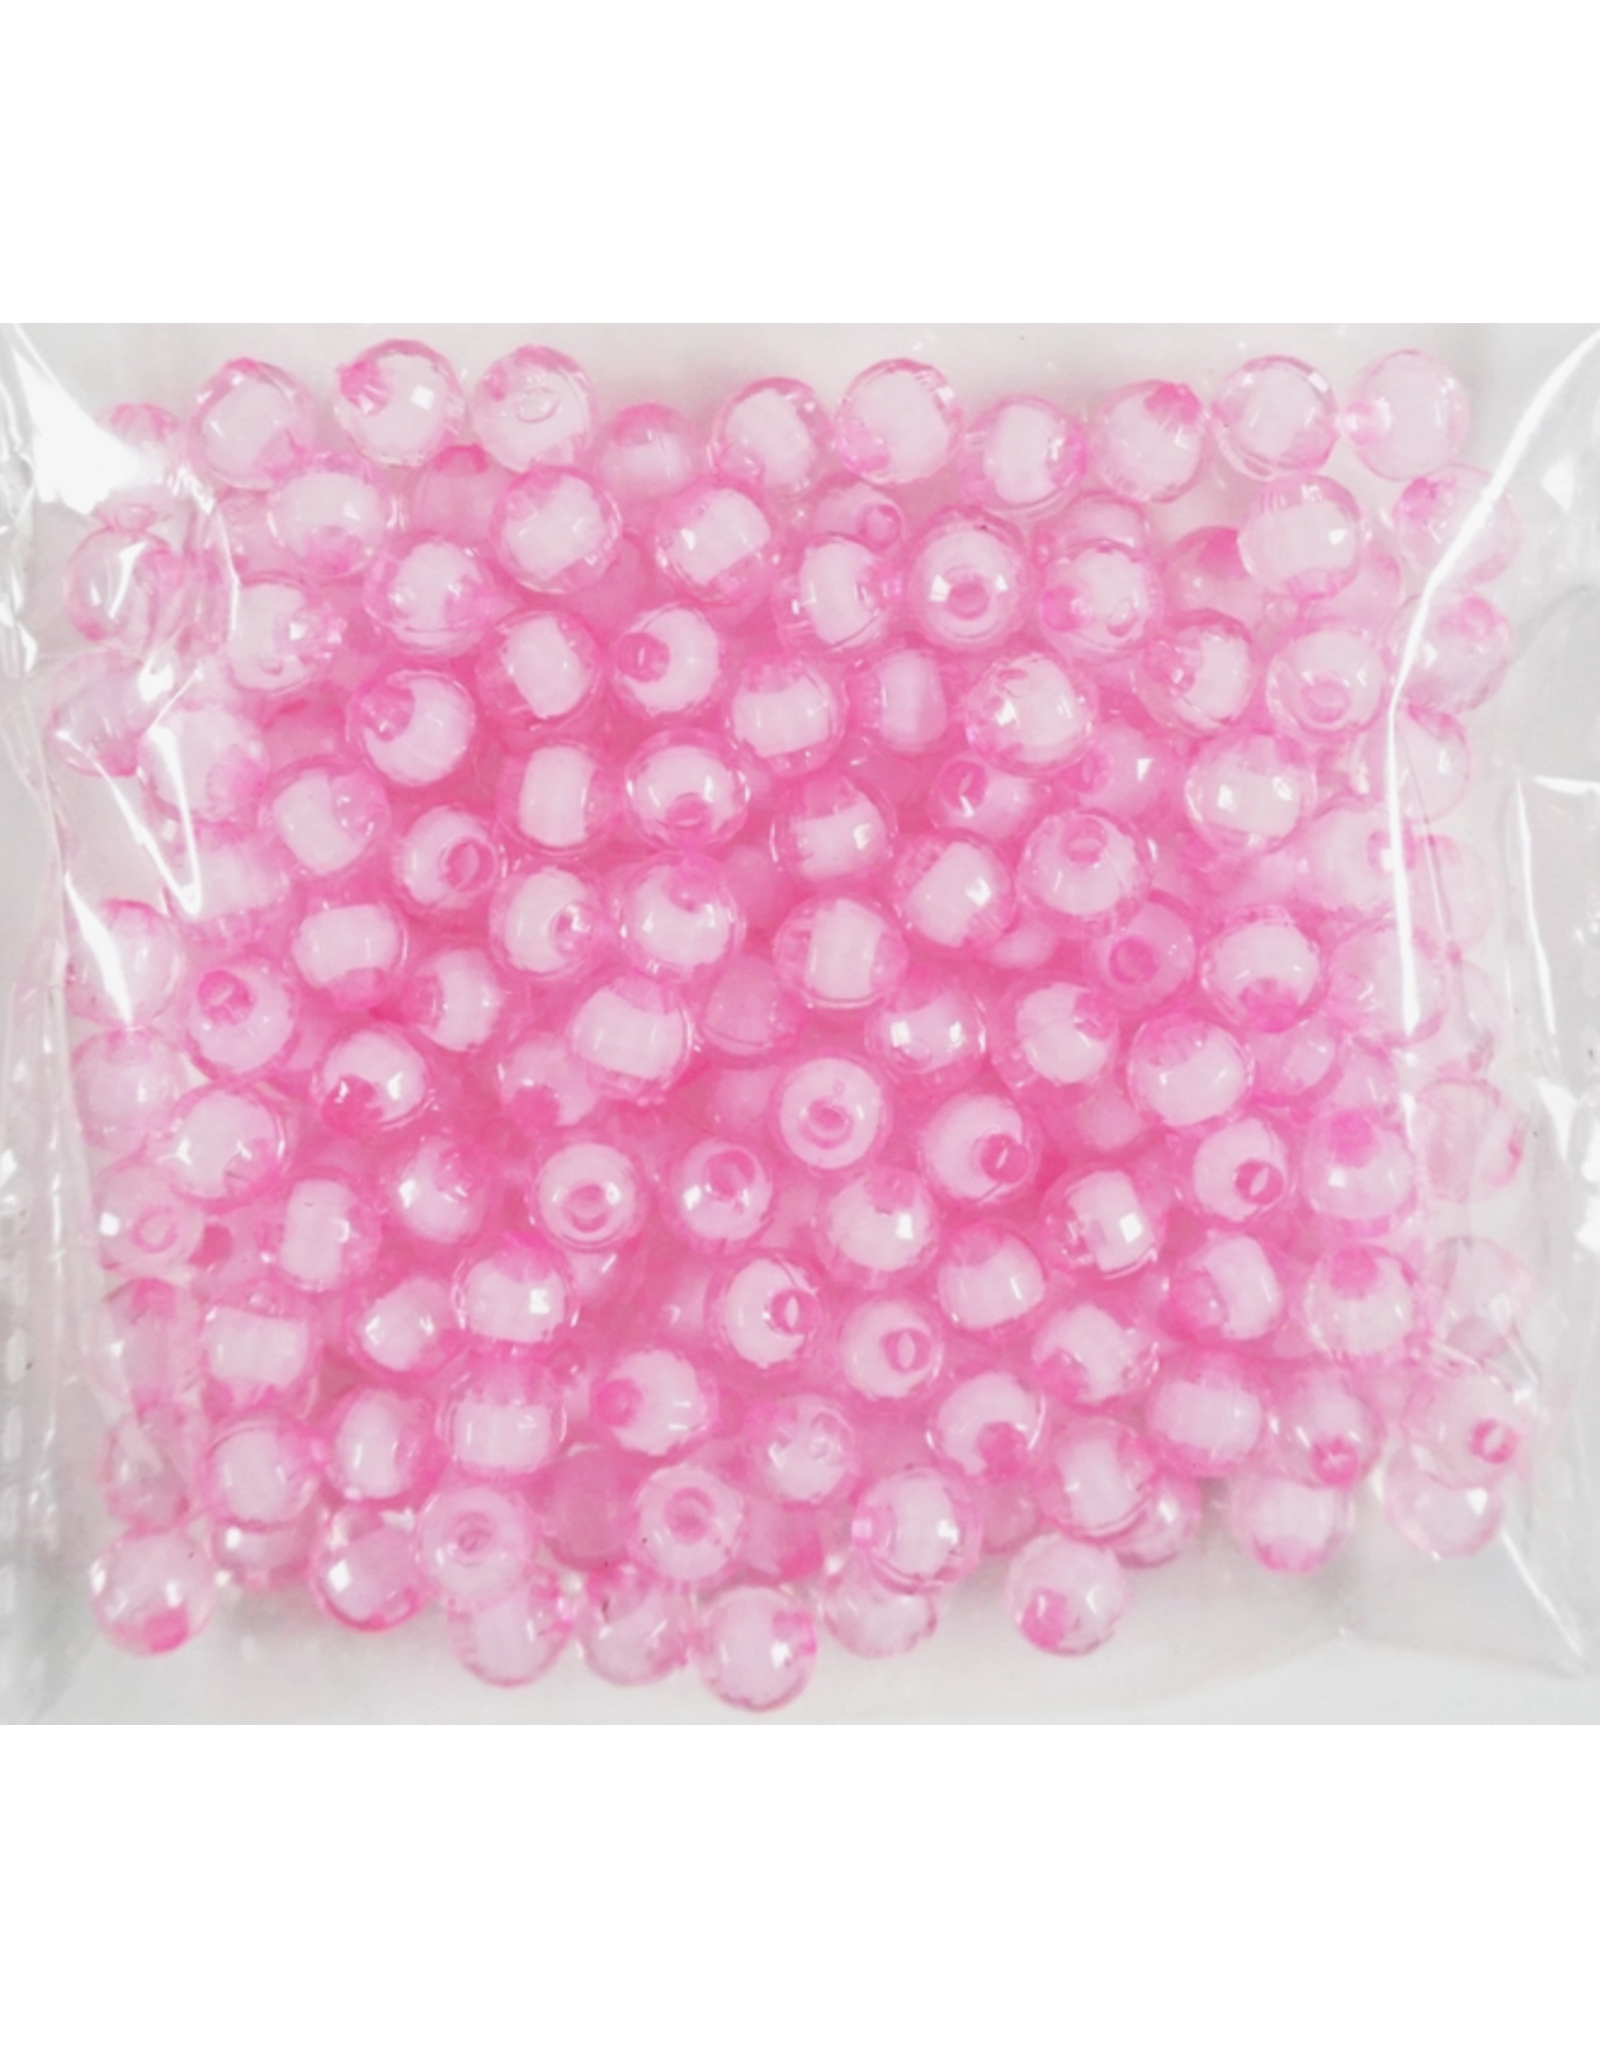 8MM FACETED ACRYLIC BEADS PINK 200PC - Creative Kids